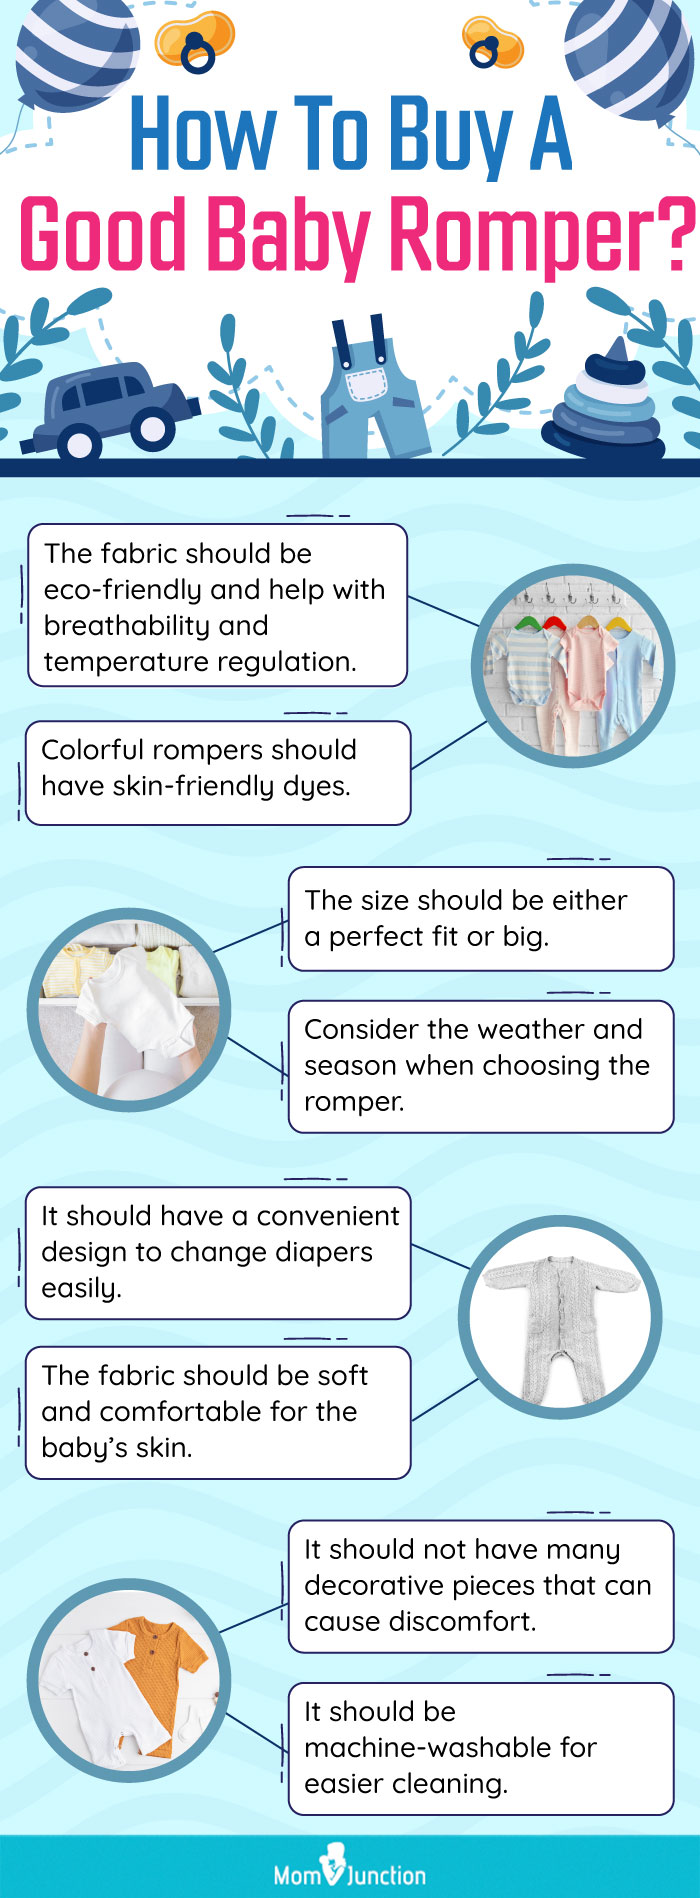 How To Buy A Good Baby Romper (infographic)